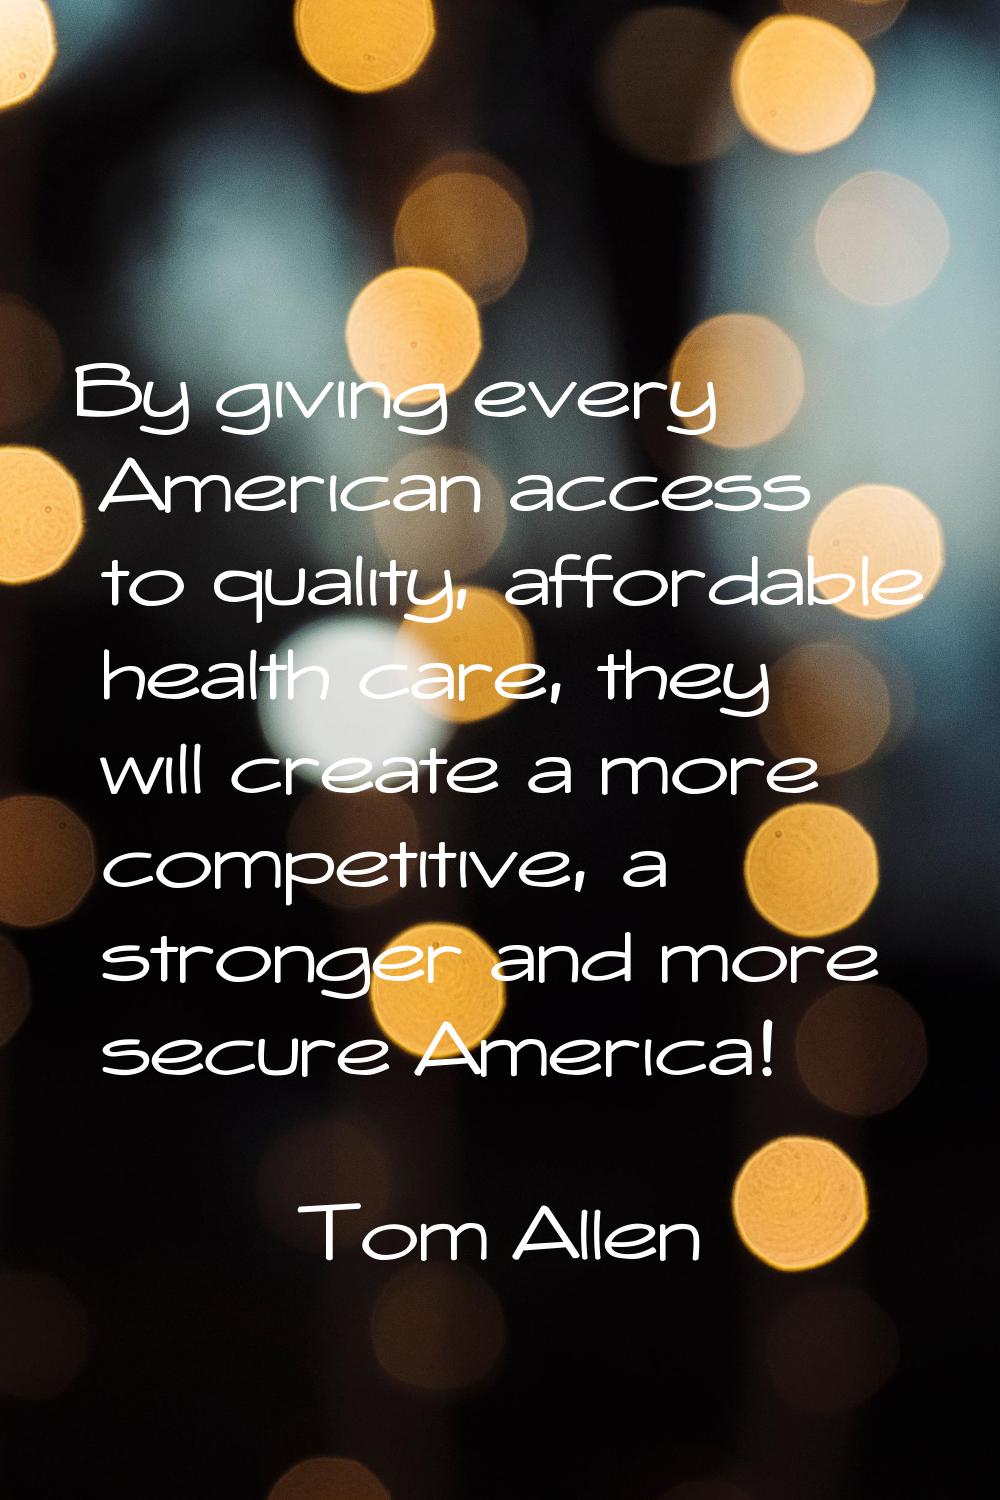 By giving every American access to quality, affordable health care, they will create a more competi